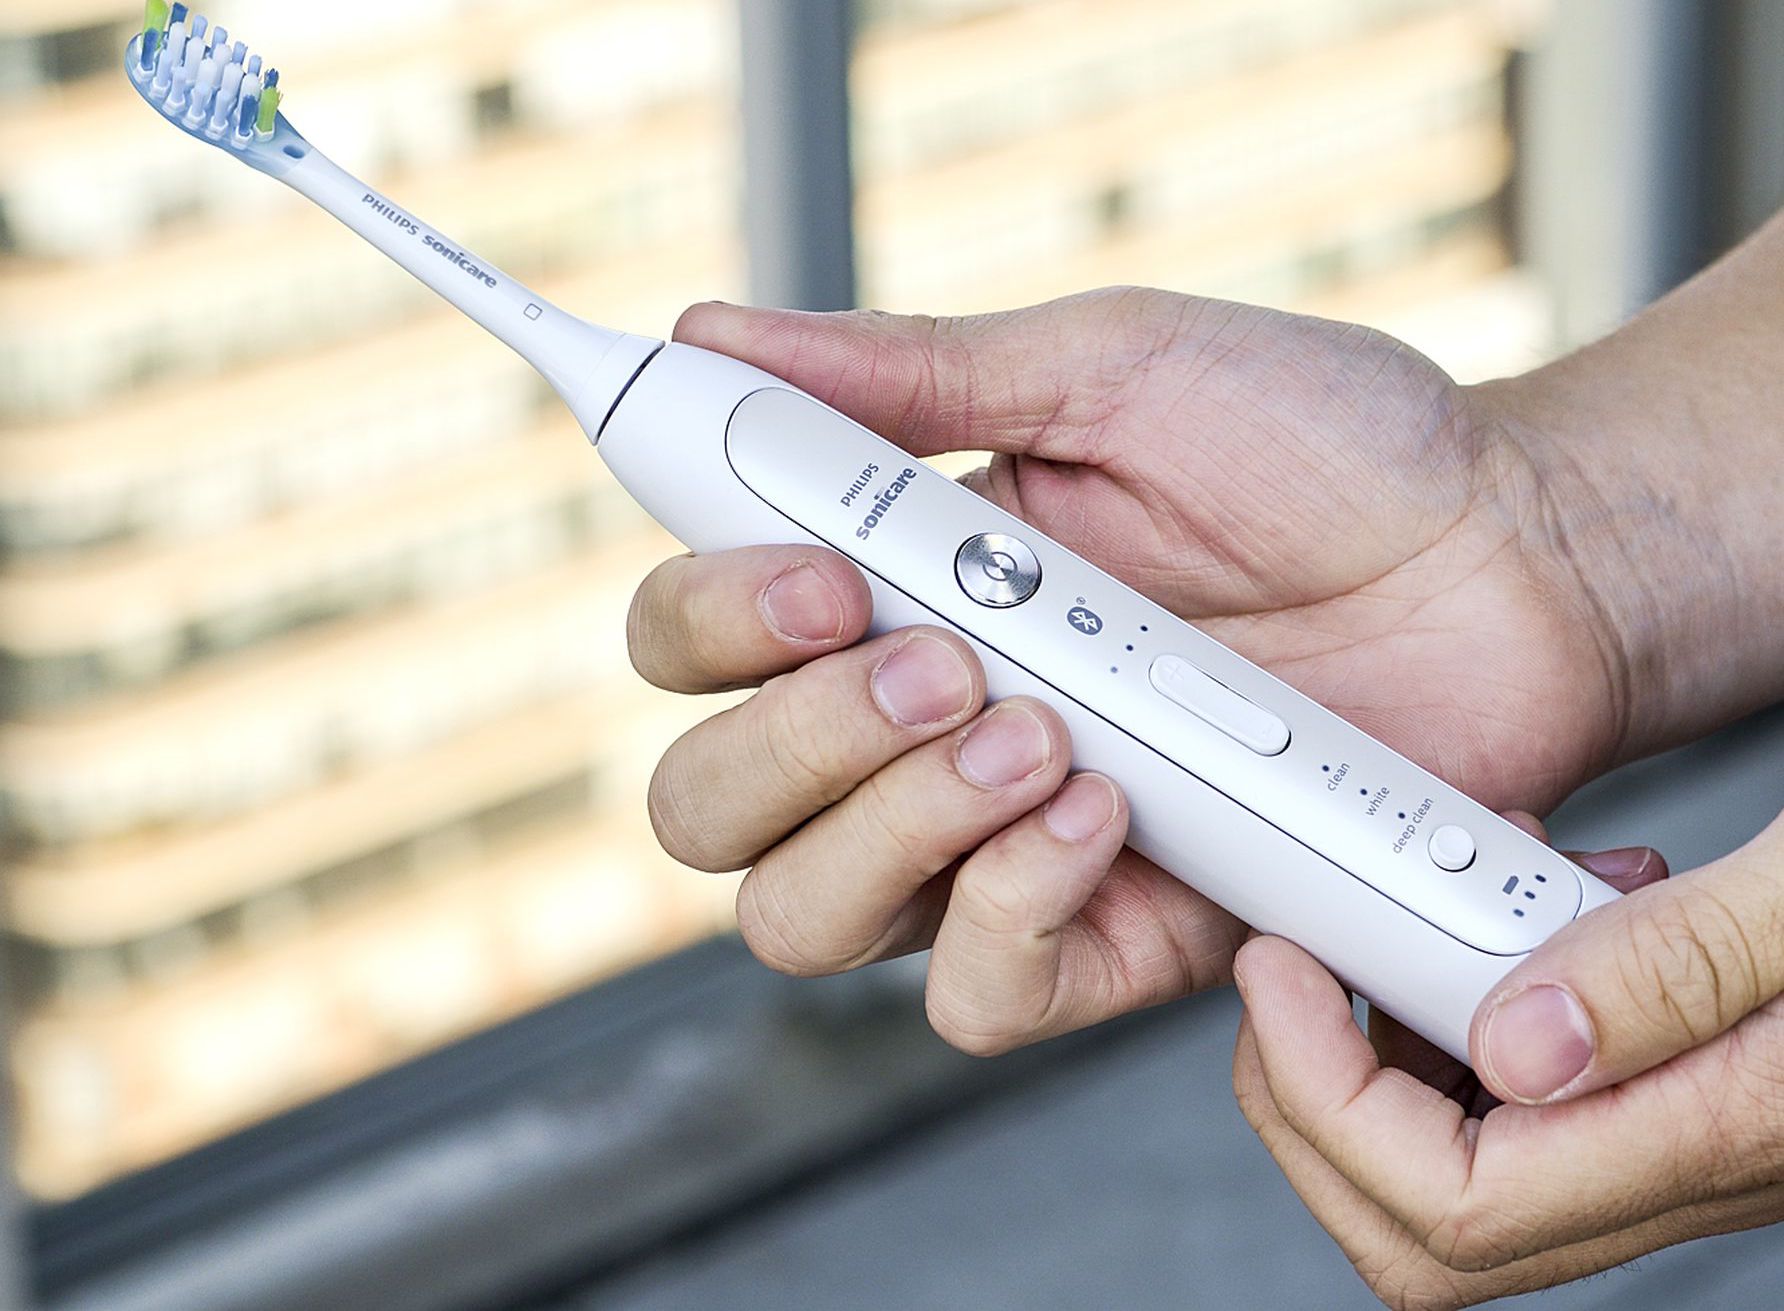 Philips Sonicare Toothbrush: How To Use